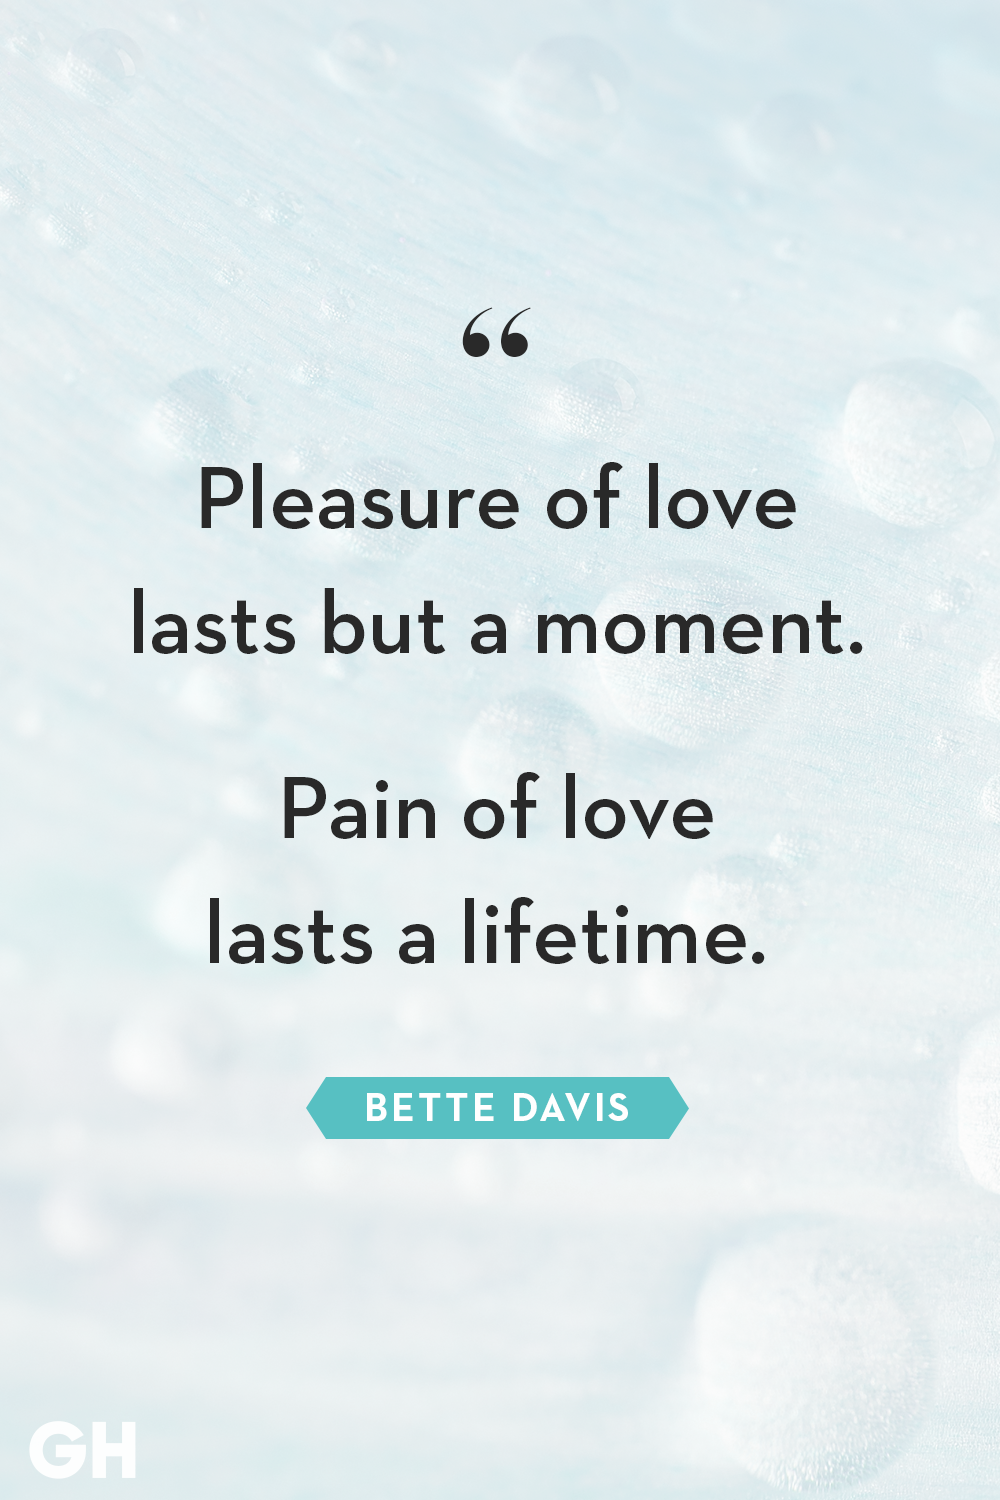 heartbreak quotes and sayings about love